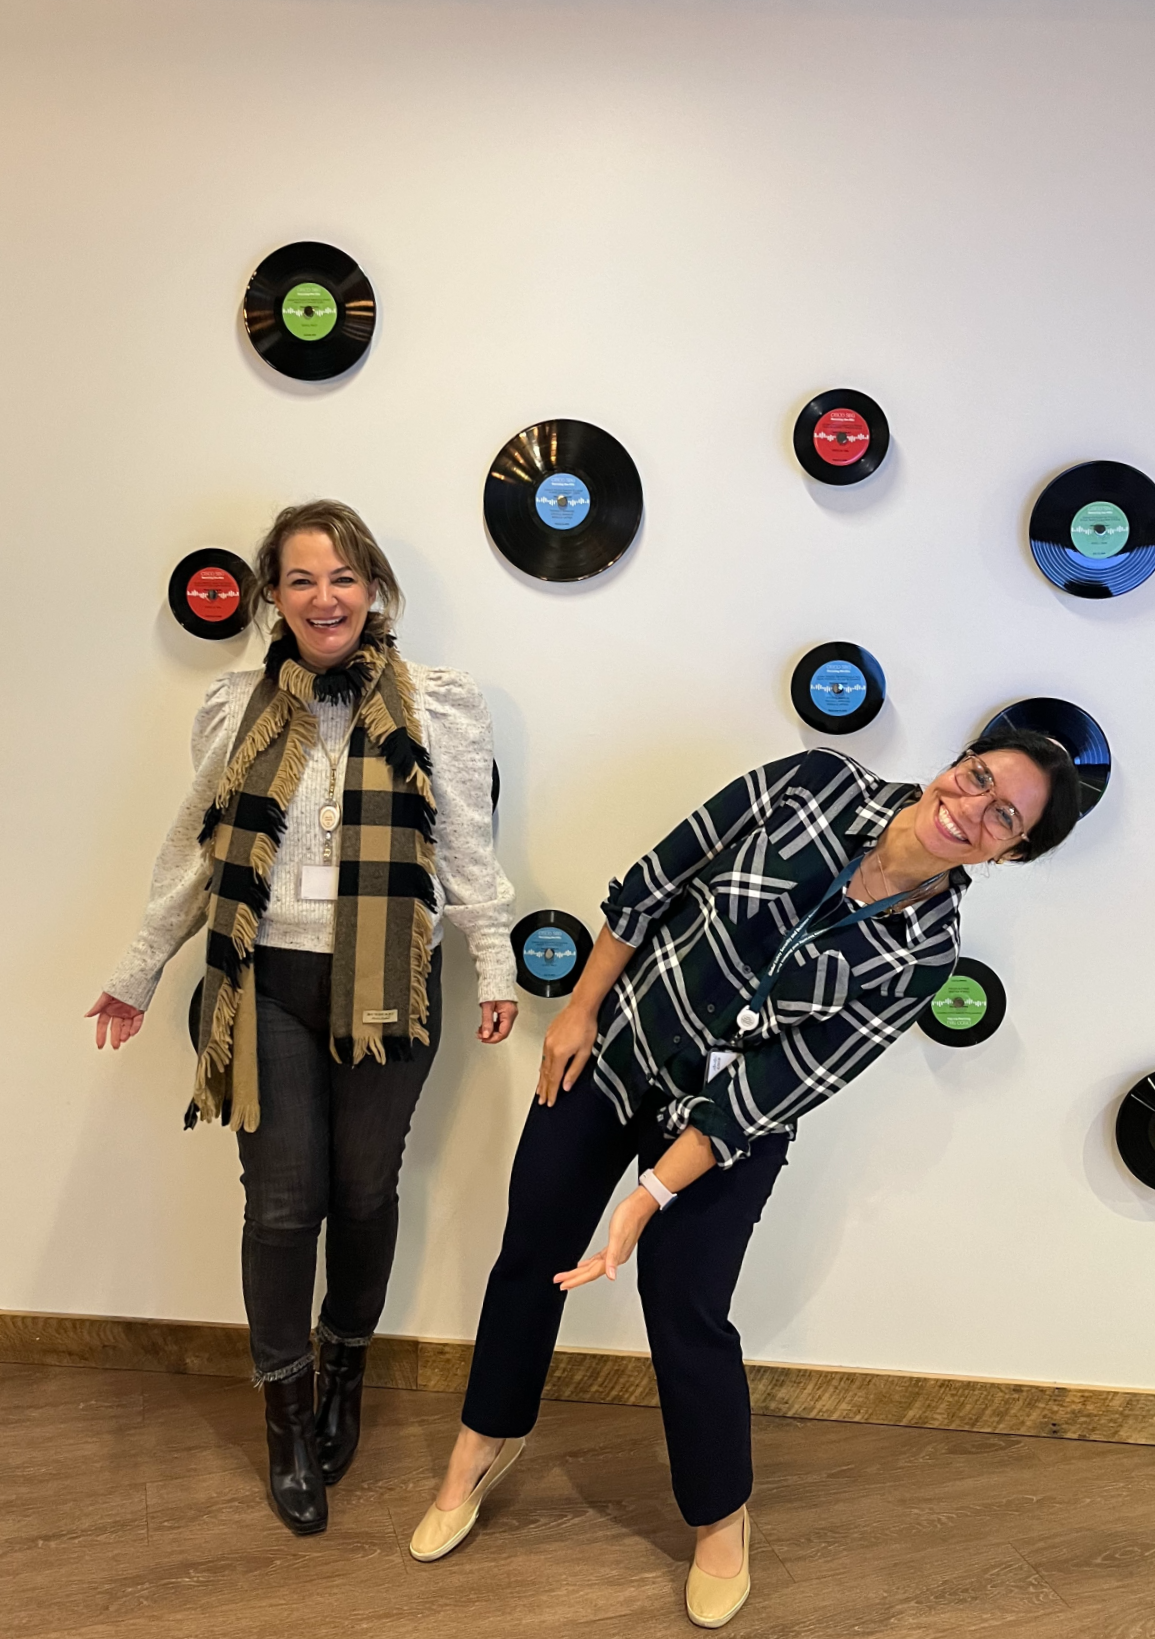 Niloo and her executive mentor playfully posing in front of white wall with records